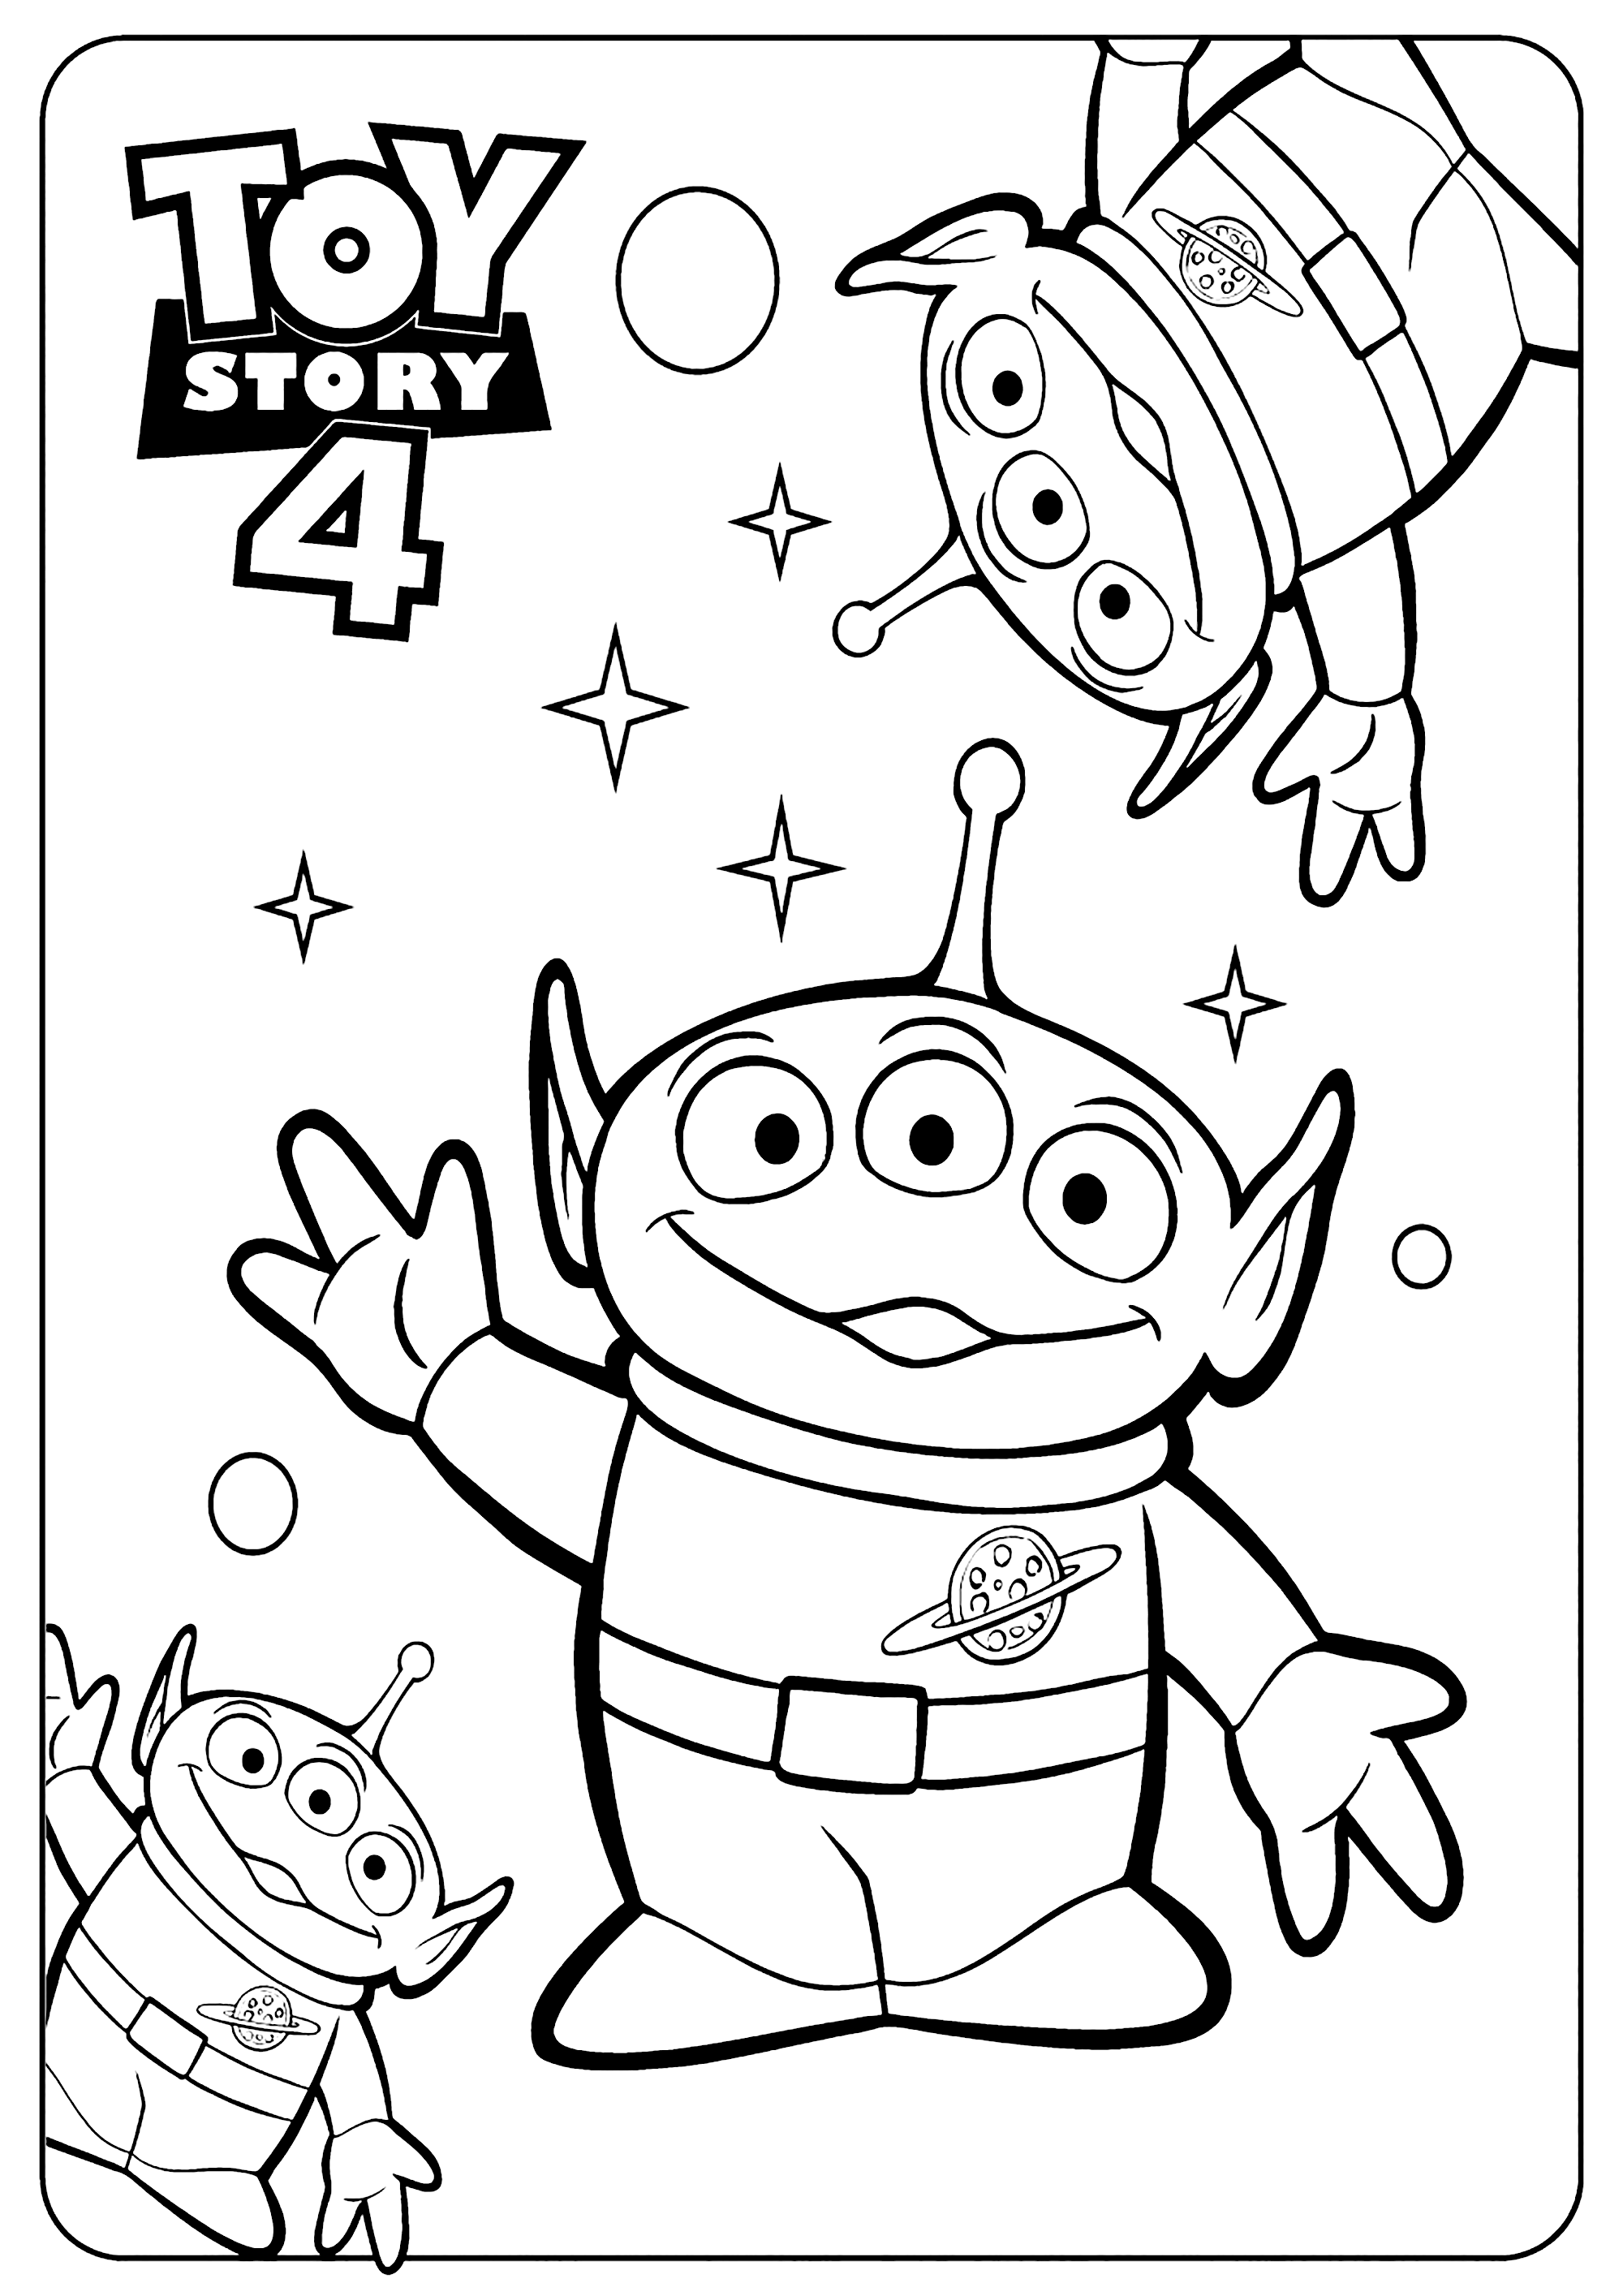 Download Bo Peep Toy Story 4 Coloring Page Disney Pixar Toy Story 4 Kids Coloring Pages